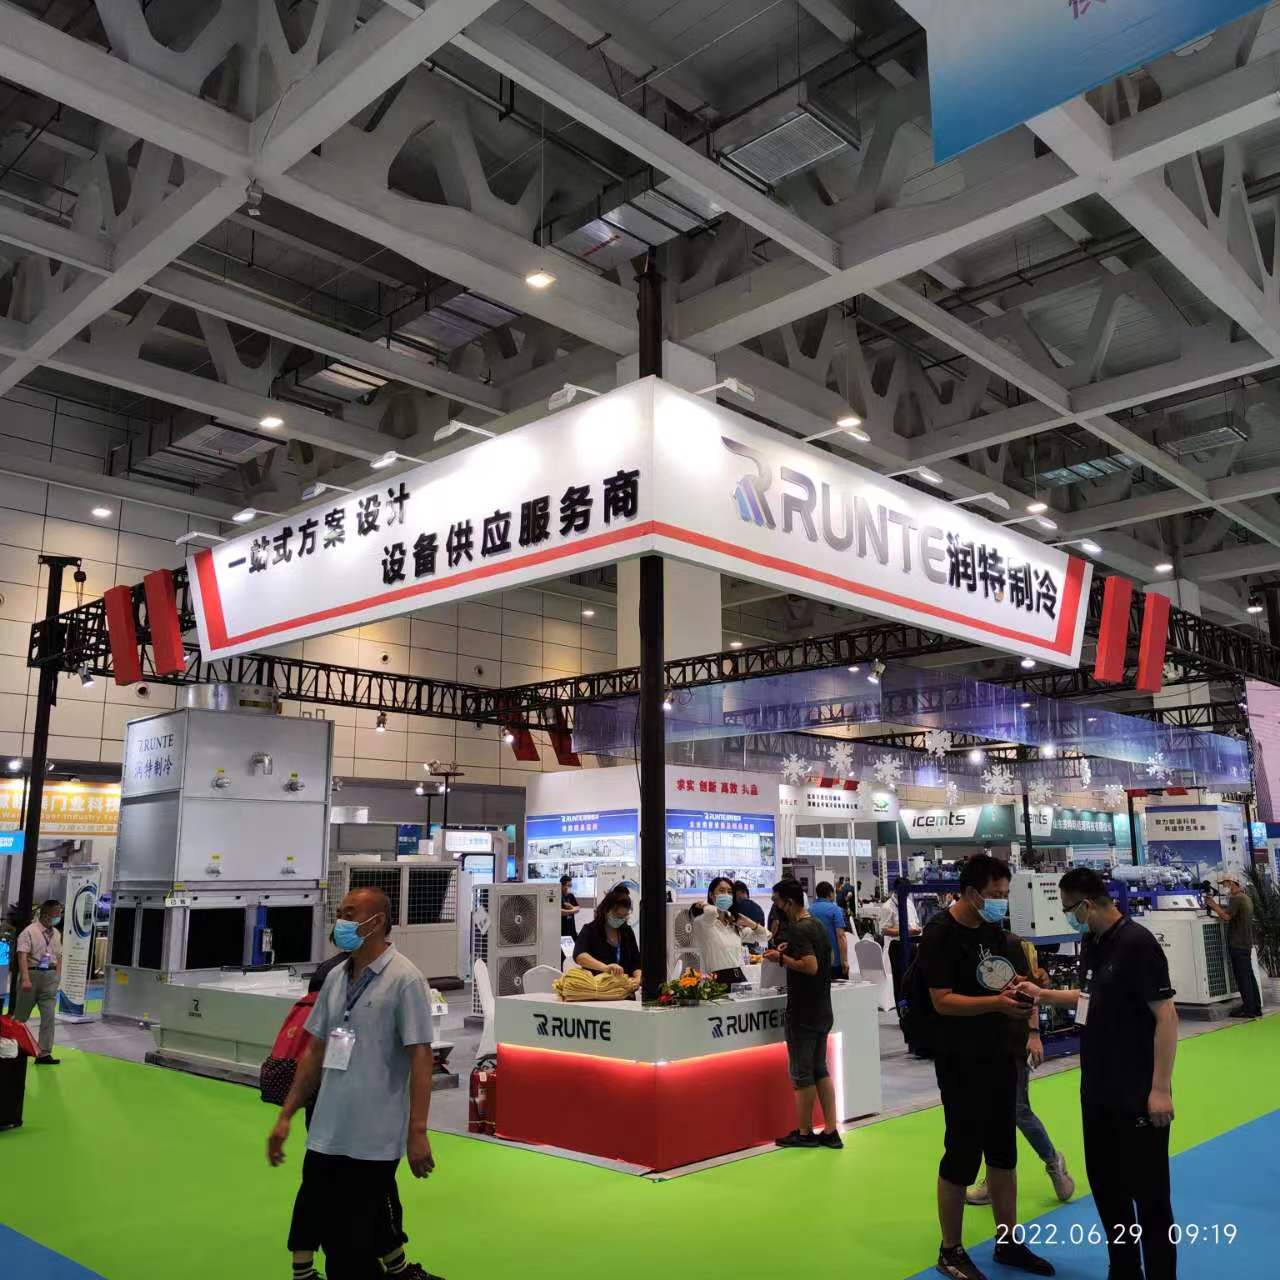 East China Refrigeration Exhibition was successfully held in Jinan City, Shandong Province